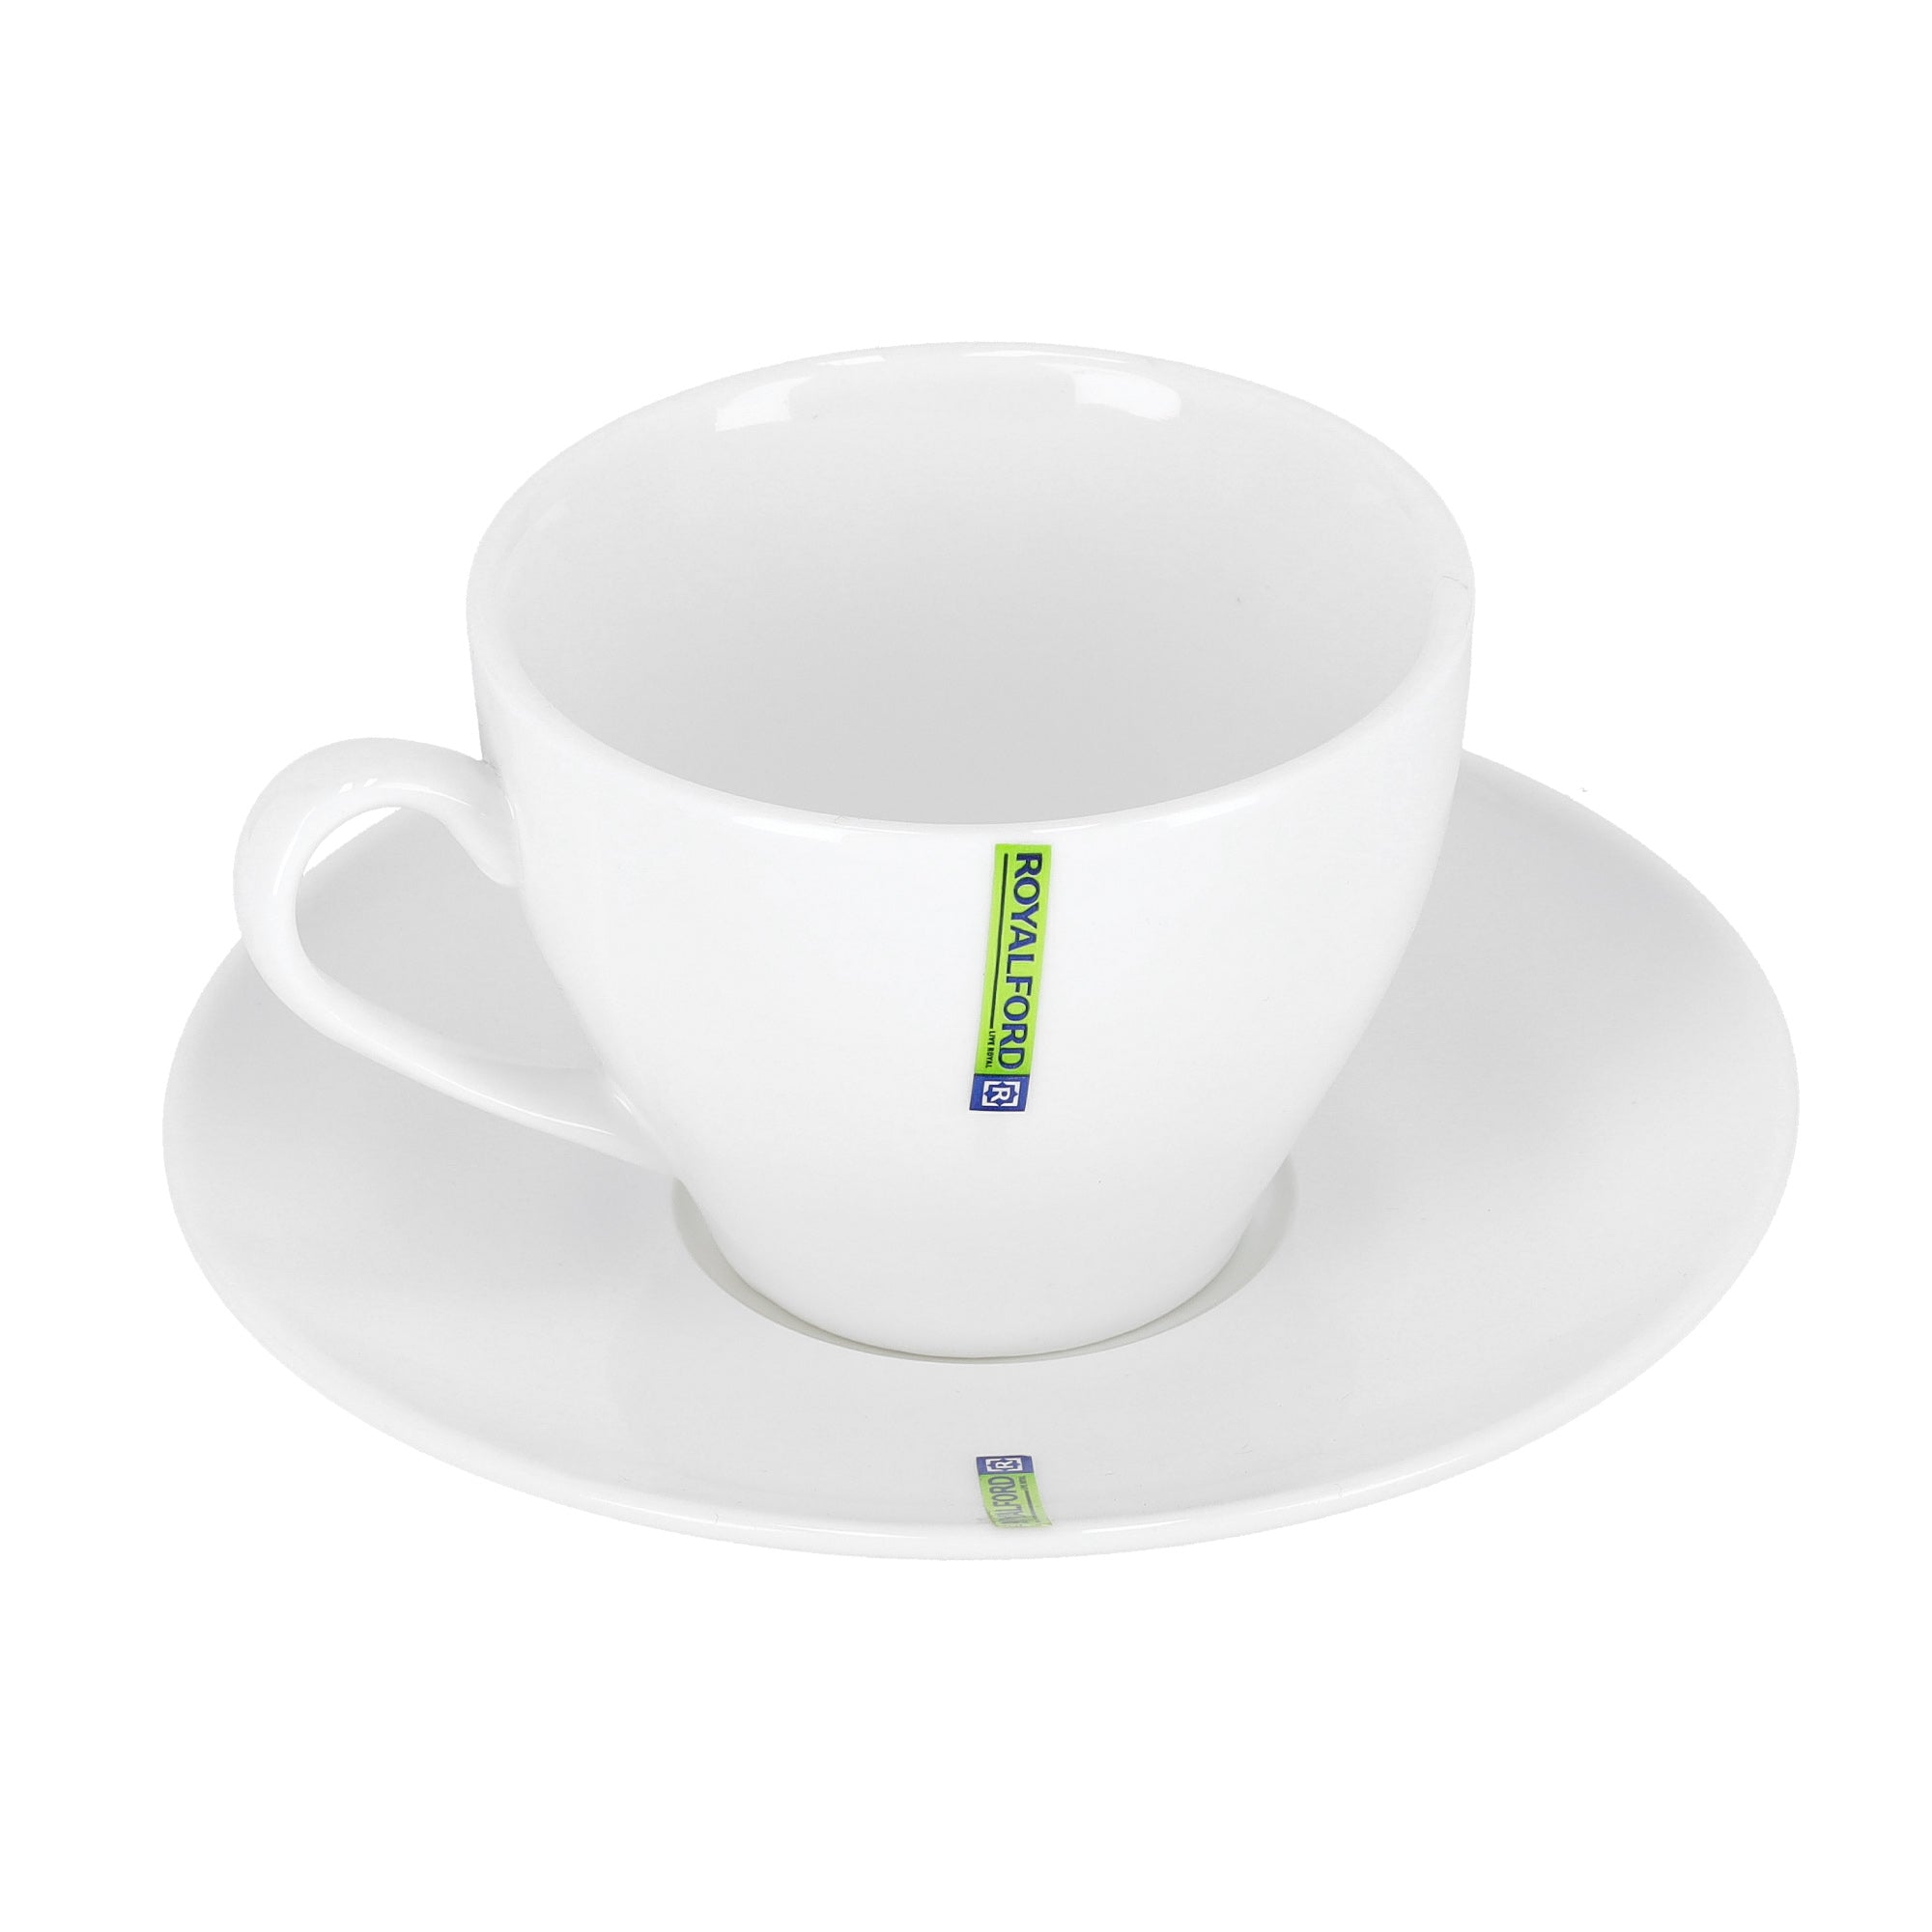 Royalford Porcelain Ware Magnesia Cup & Saucer White